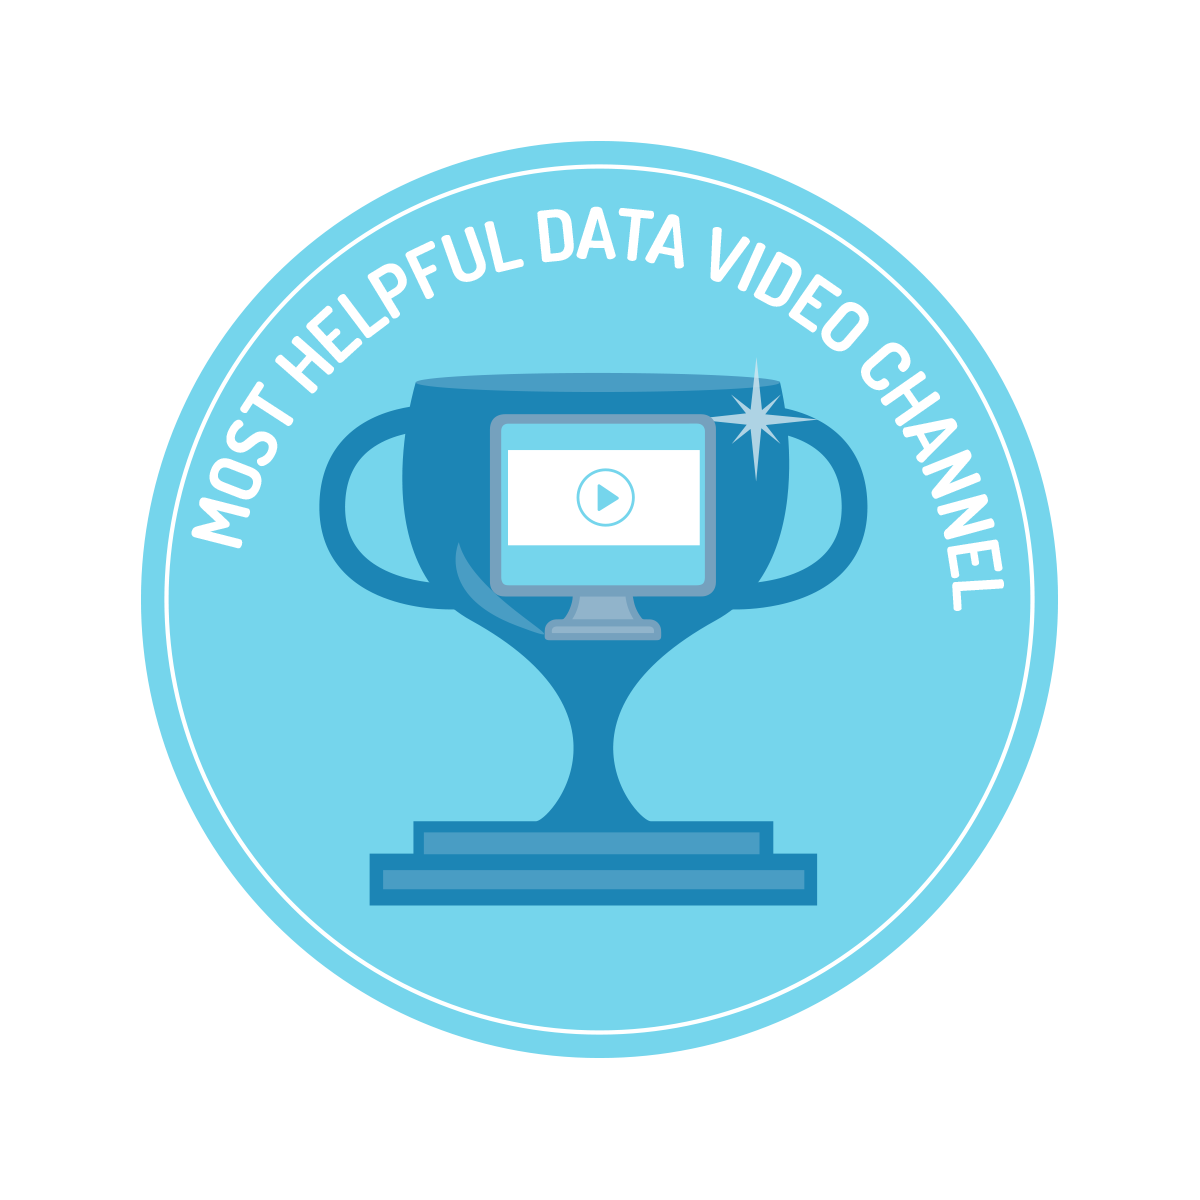 Announcing the Winners of the 2022 Data Literacy Awards! | Data Literacy | Data Literacy  